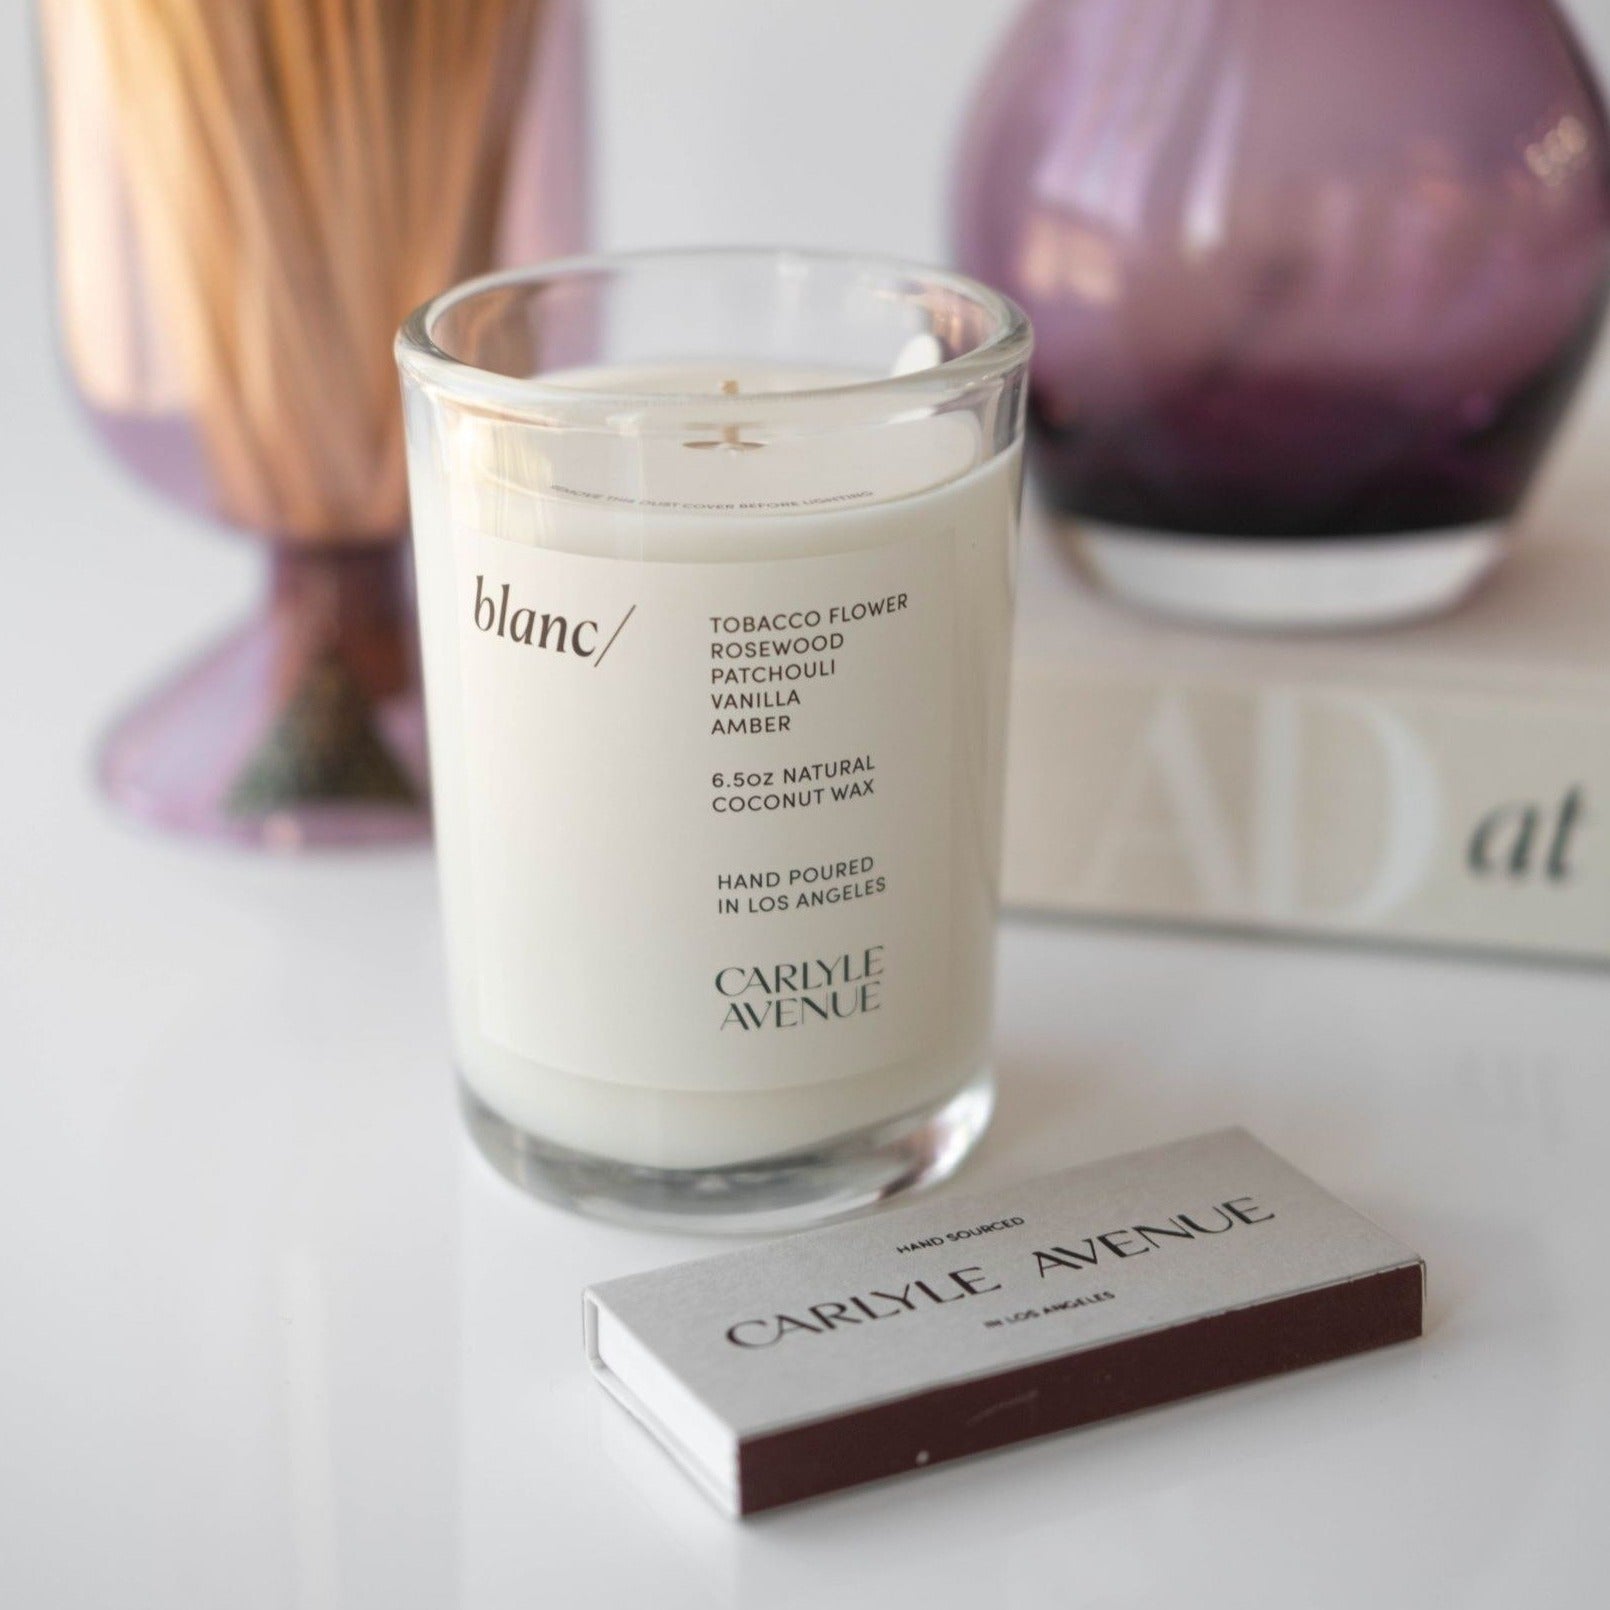 Carlyle Avenue Scented Candle - Blanc